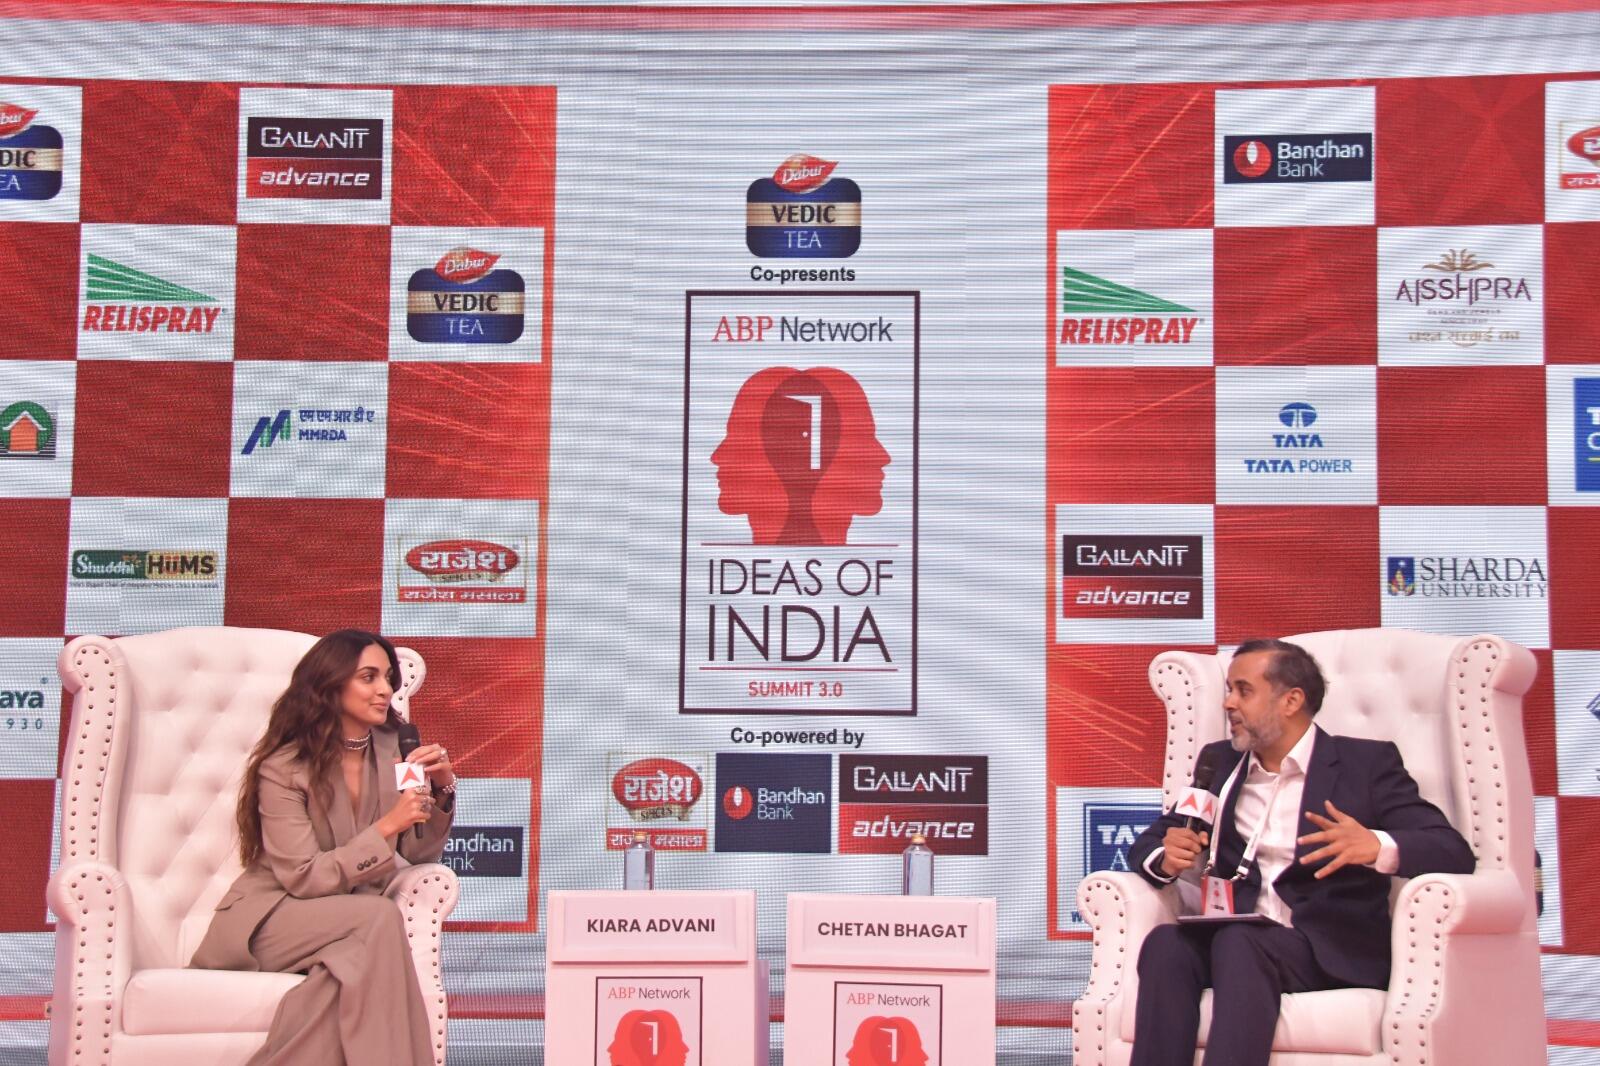 Actress Kiara Advani and Director Atlee share secrets of appealing to masses through movies at the ‘Ideas of India’ Summit 3.0